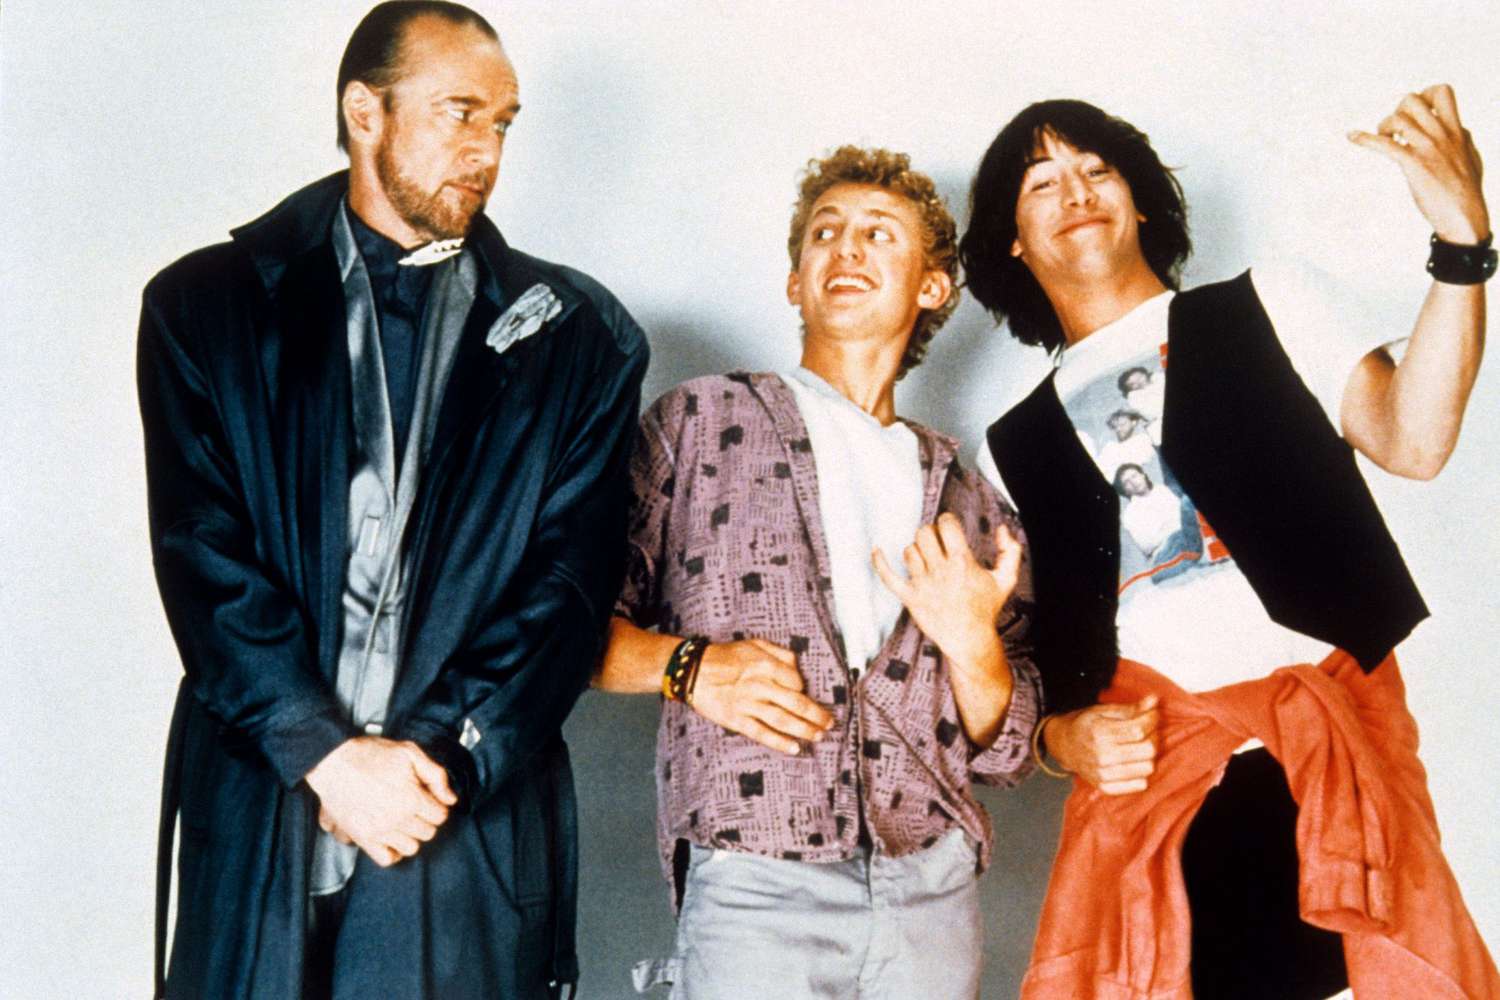 BILL AND TED'S EXCELLENT ADVENTURE, from left: George Carlin, Alex Winter, Keanu Reeves, 1989, © Ori